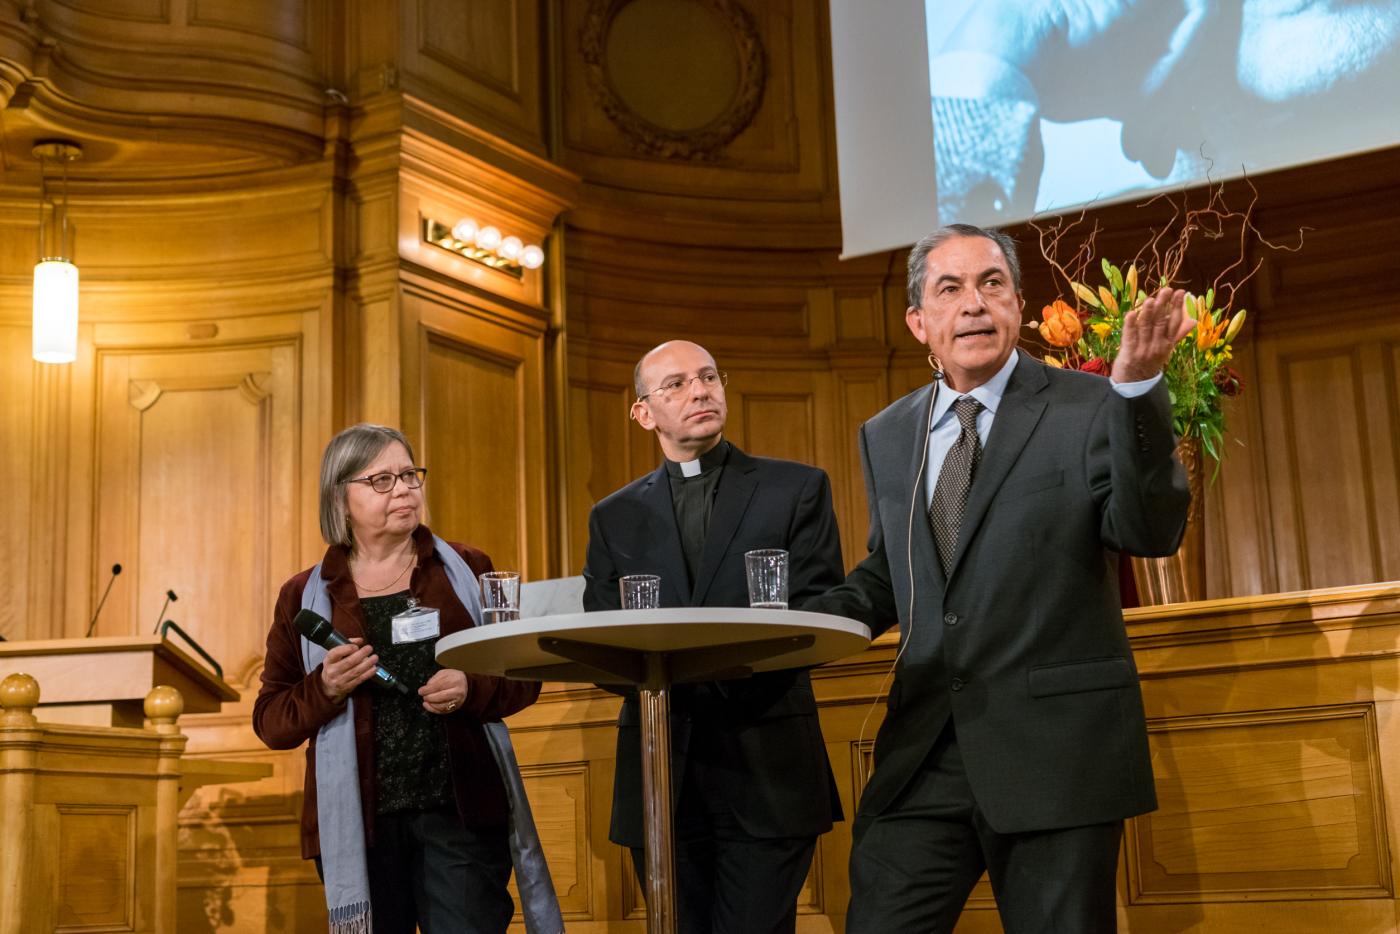 Mitri Raheb (centre) and Gideon Levy (right) at the award ceremony. © WCC/Albin Hillert